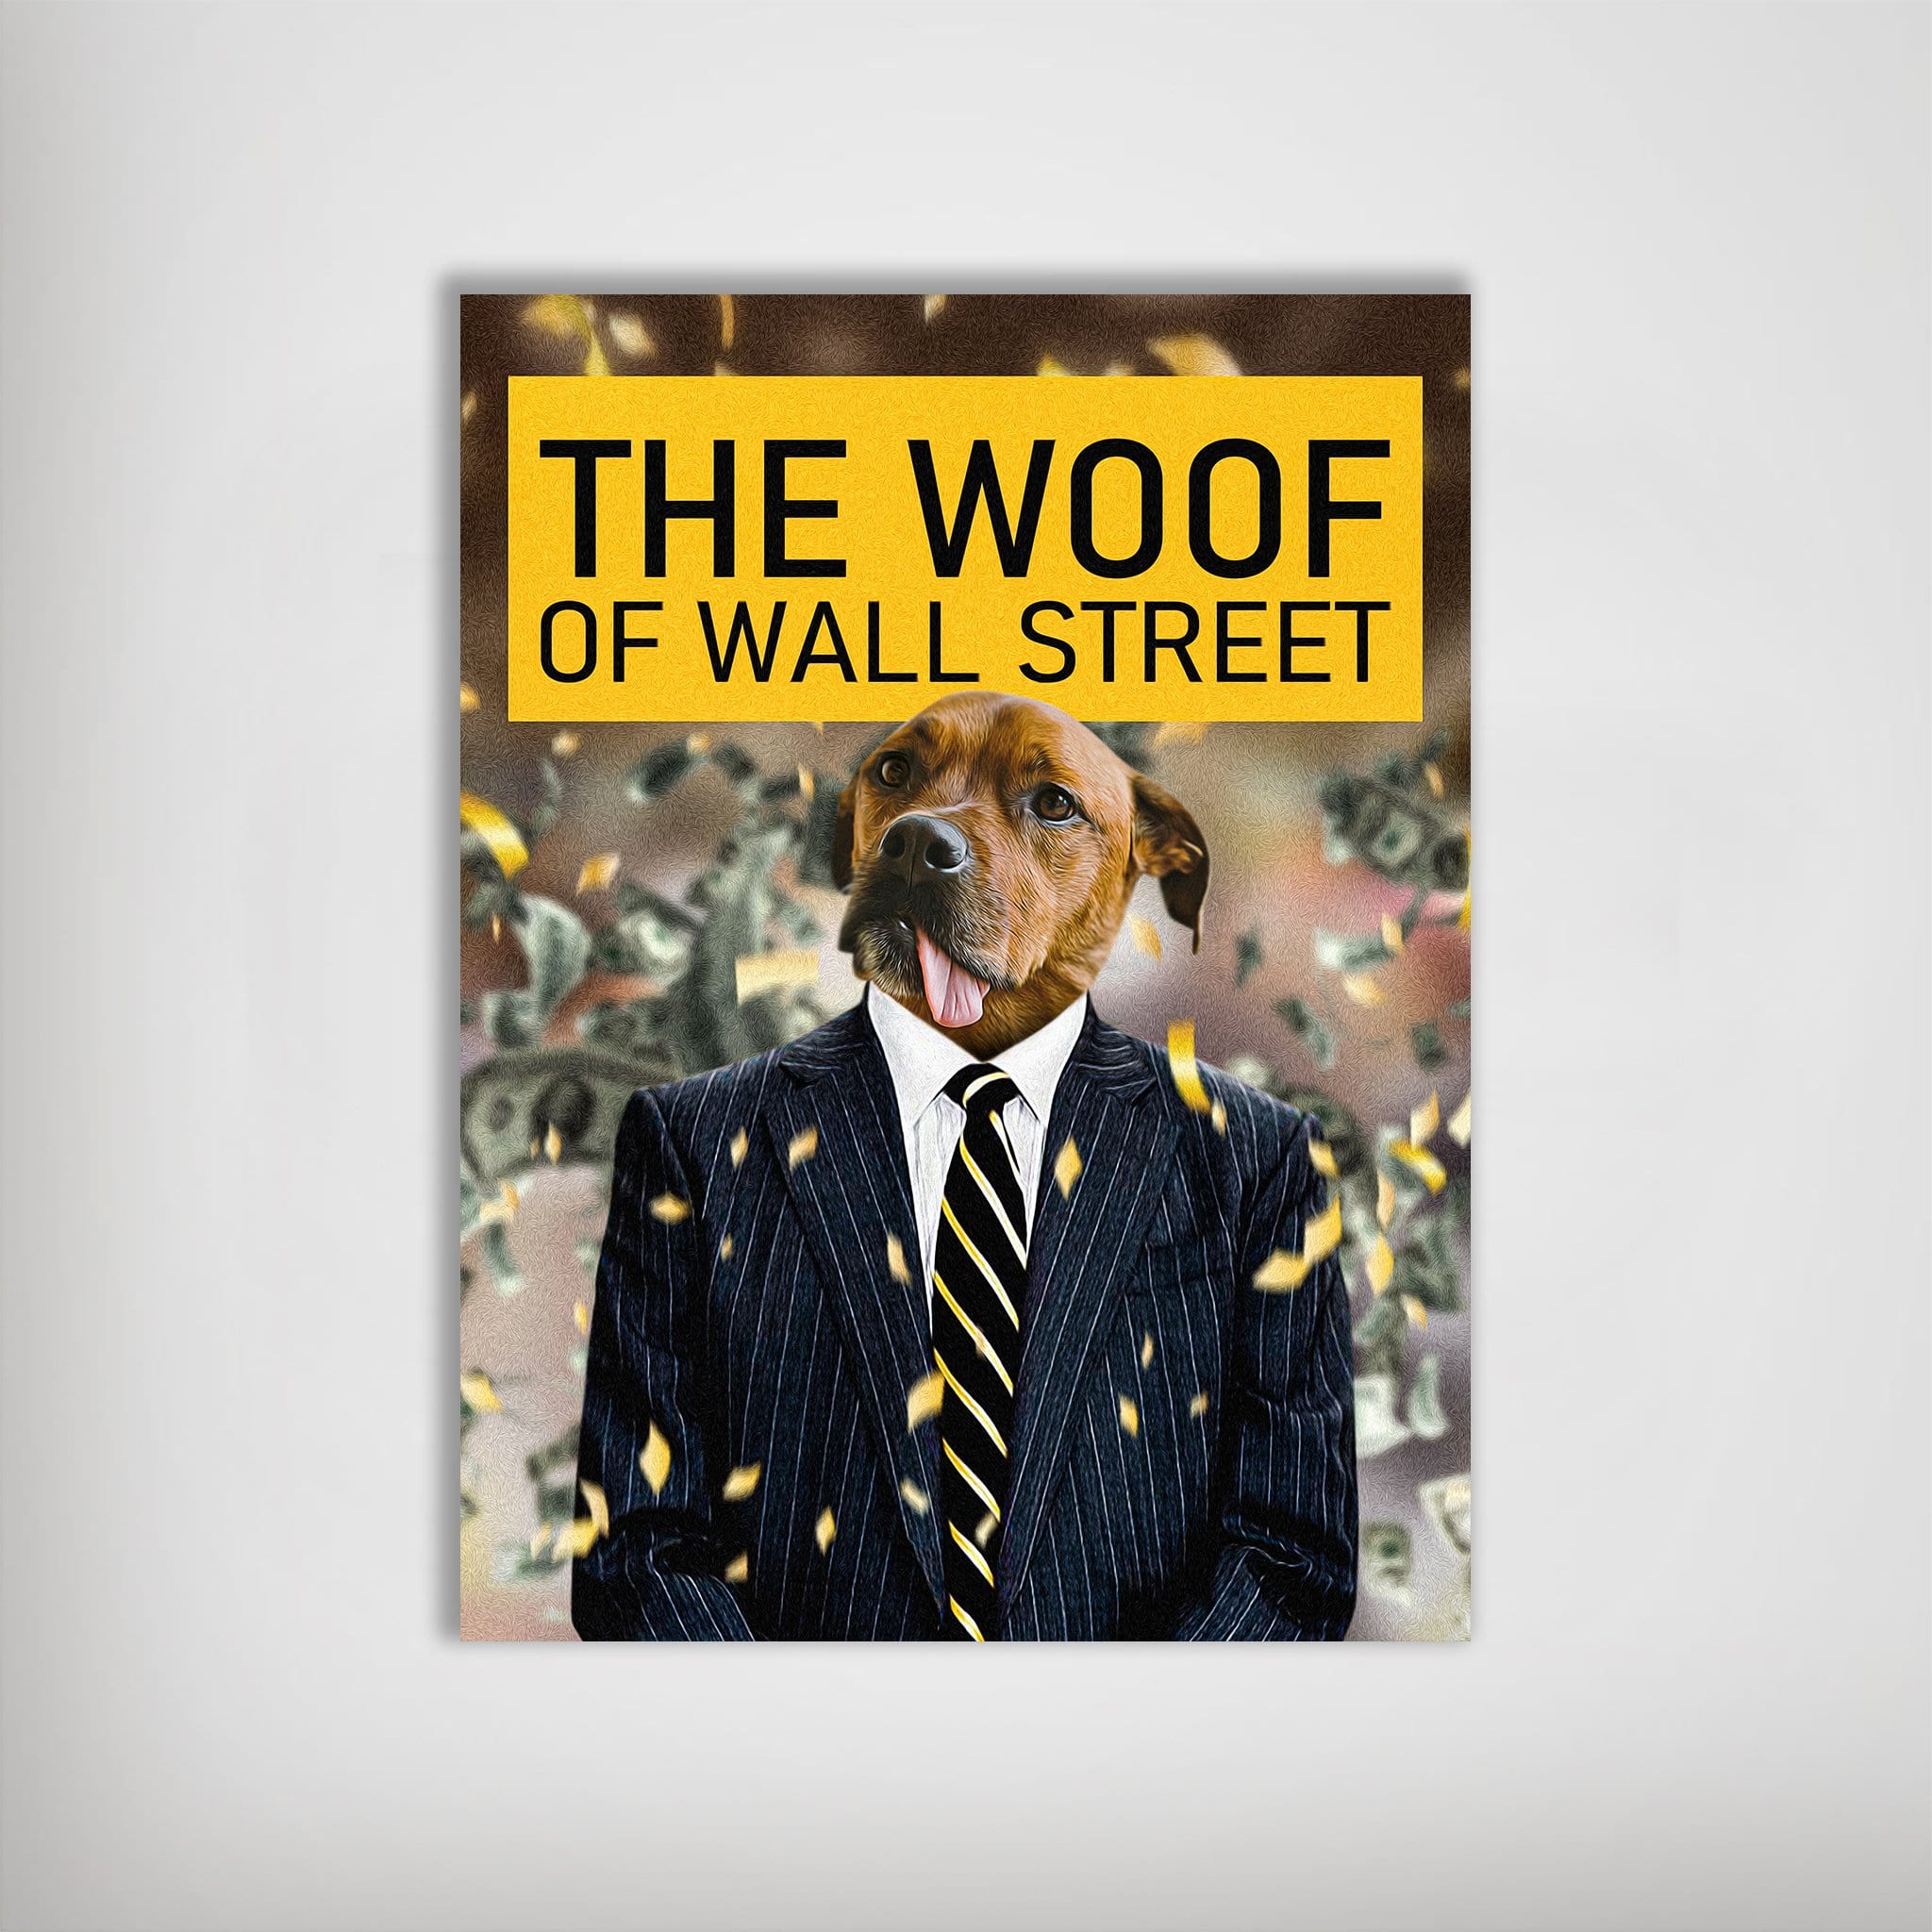 https://cdn.shopify.com/s/files/1/0248/0377/0450/products/TheWoofofWallStreetPremiumPoster.jpg?v=1605255718&width=2048